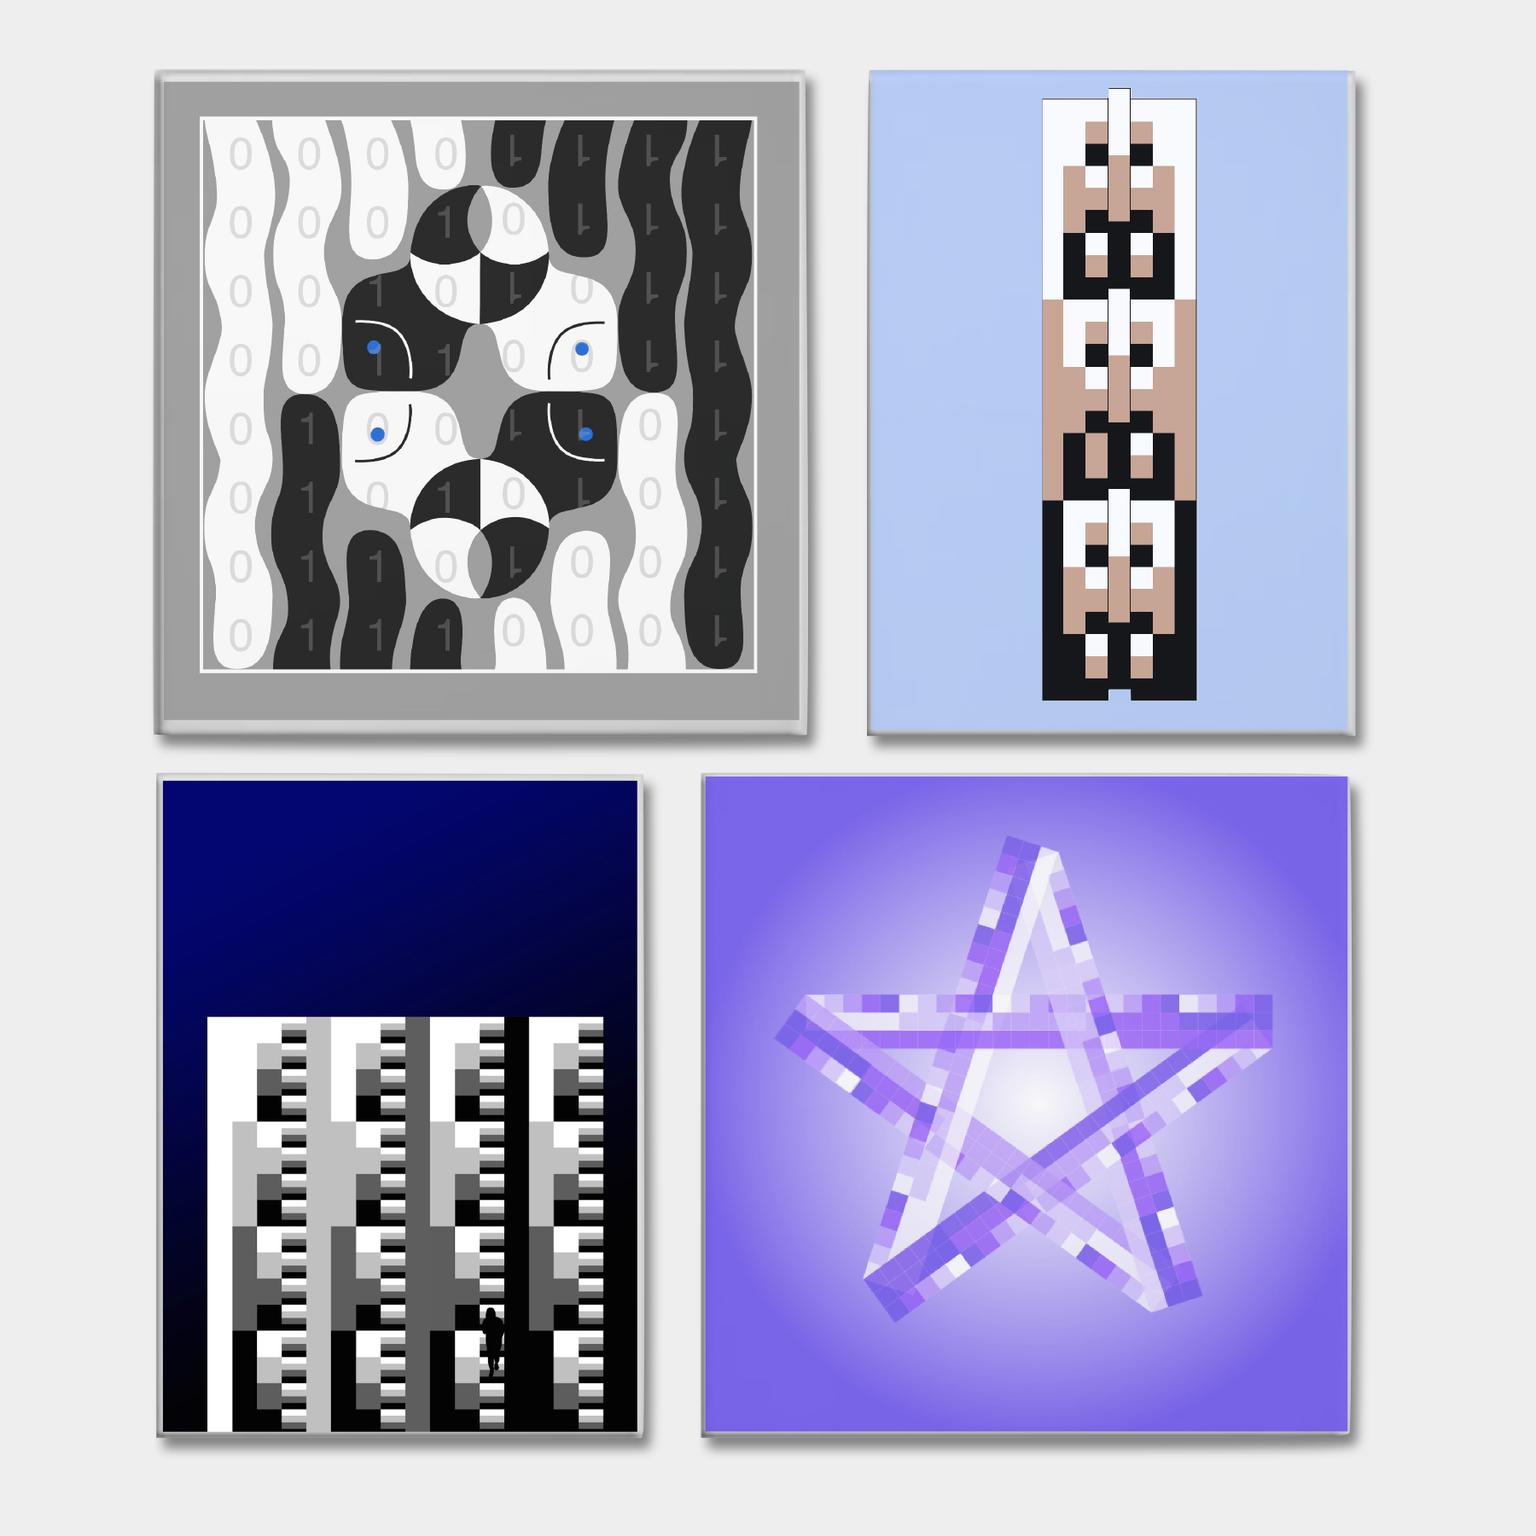 Image for entry '2-3-4-5 (set with Pisces II, Three Kings, Before Twilight and 125)'